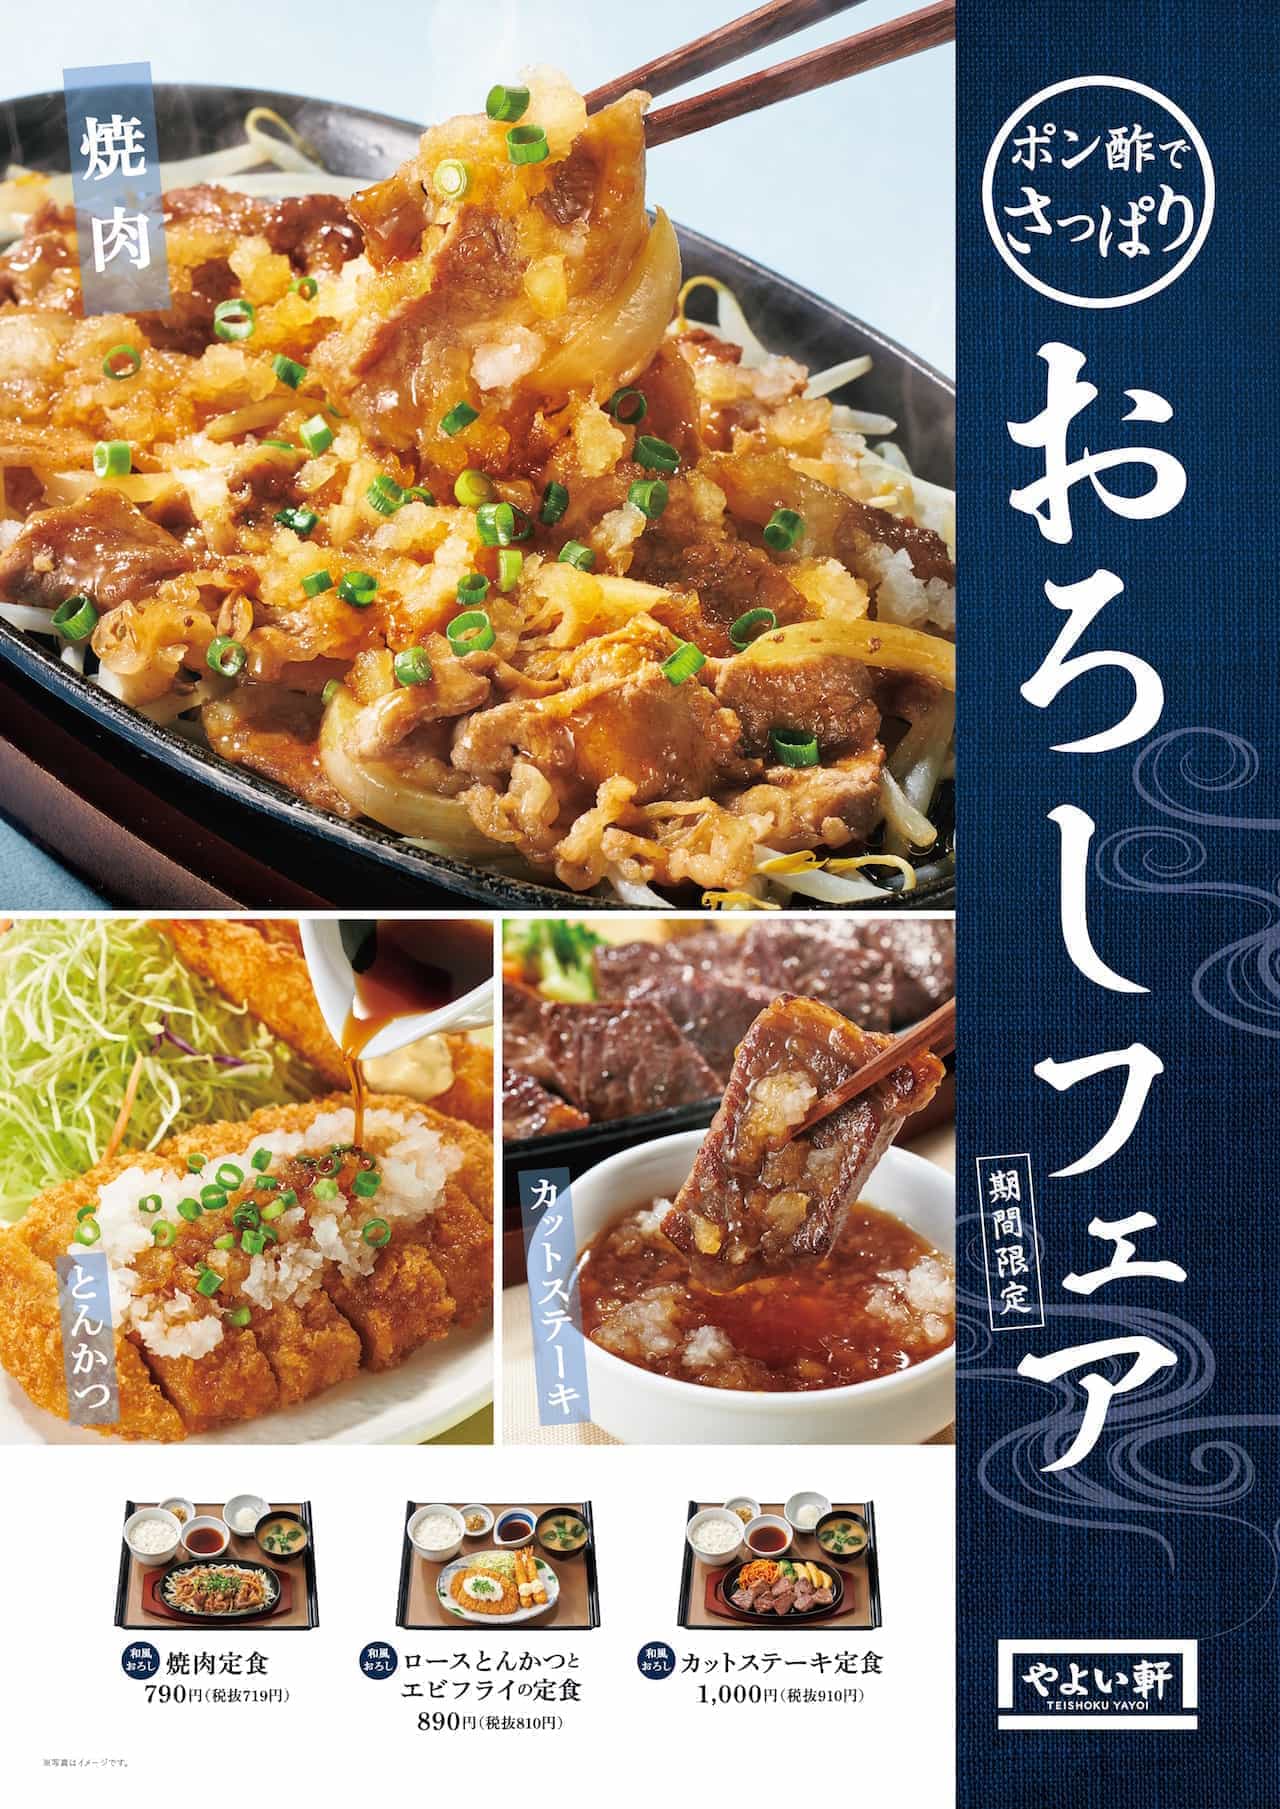 "Grated Fair" for a limited time at Yayoiken